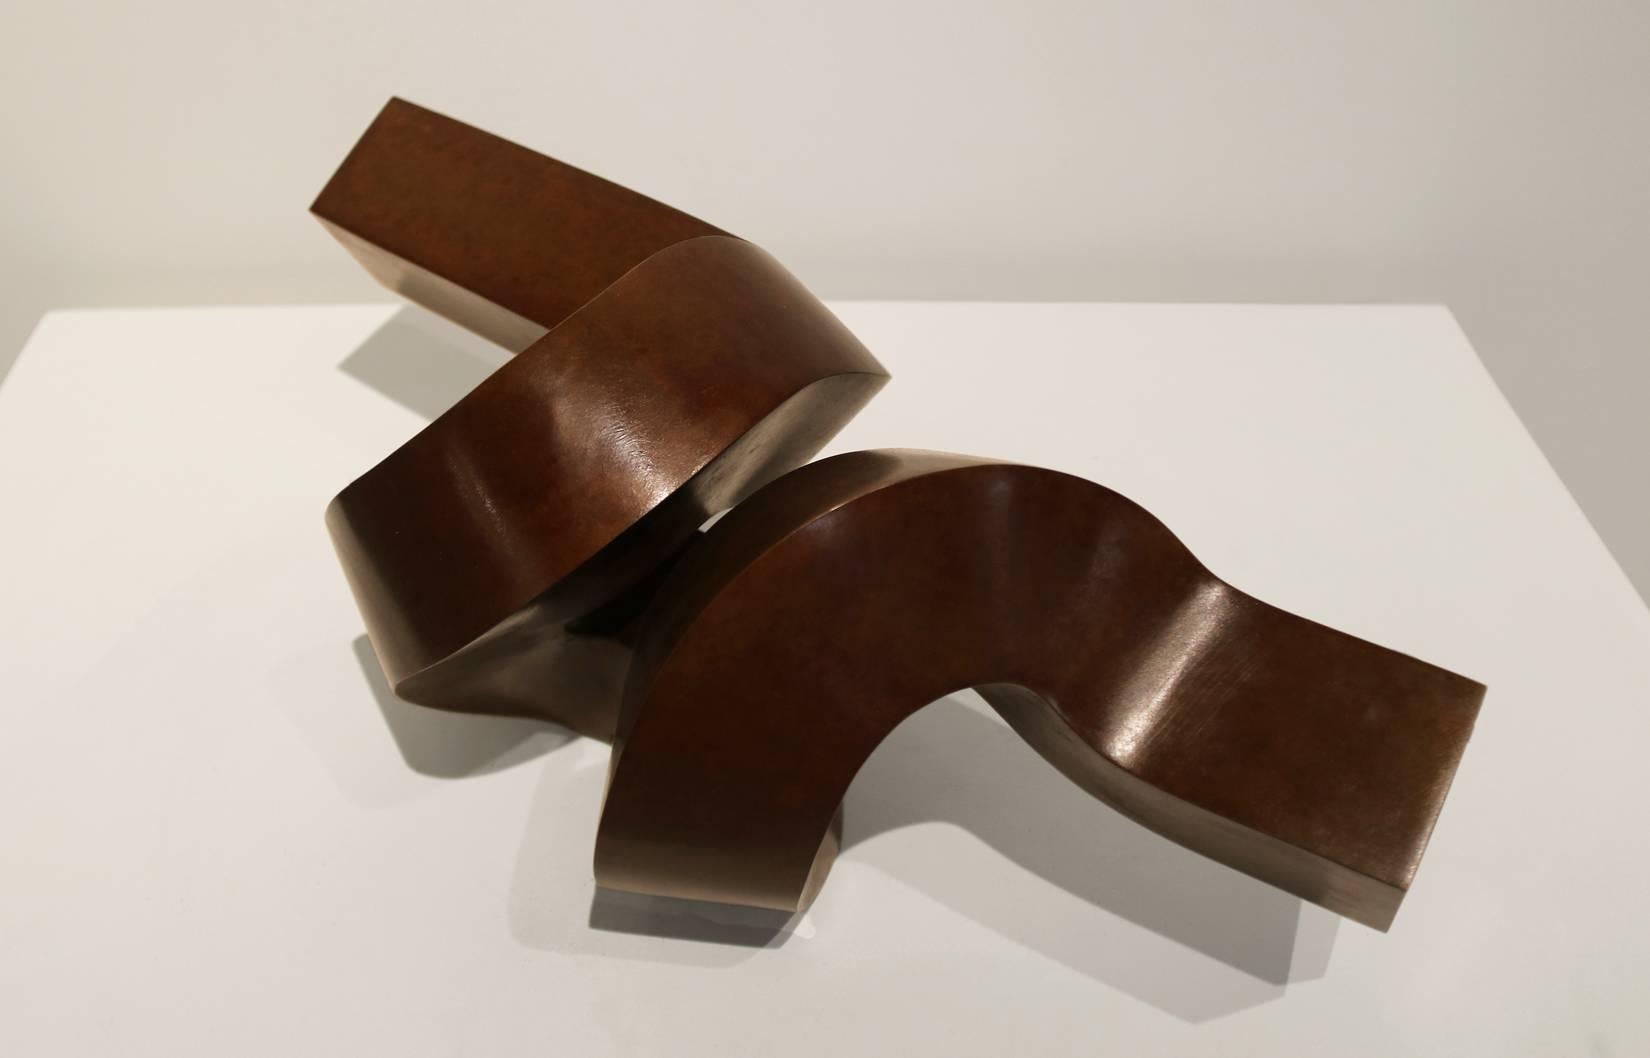 RIFF is a fabricated bronze sculpture finished with a rich 